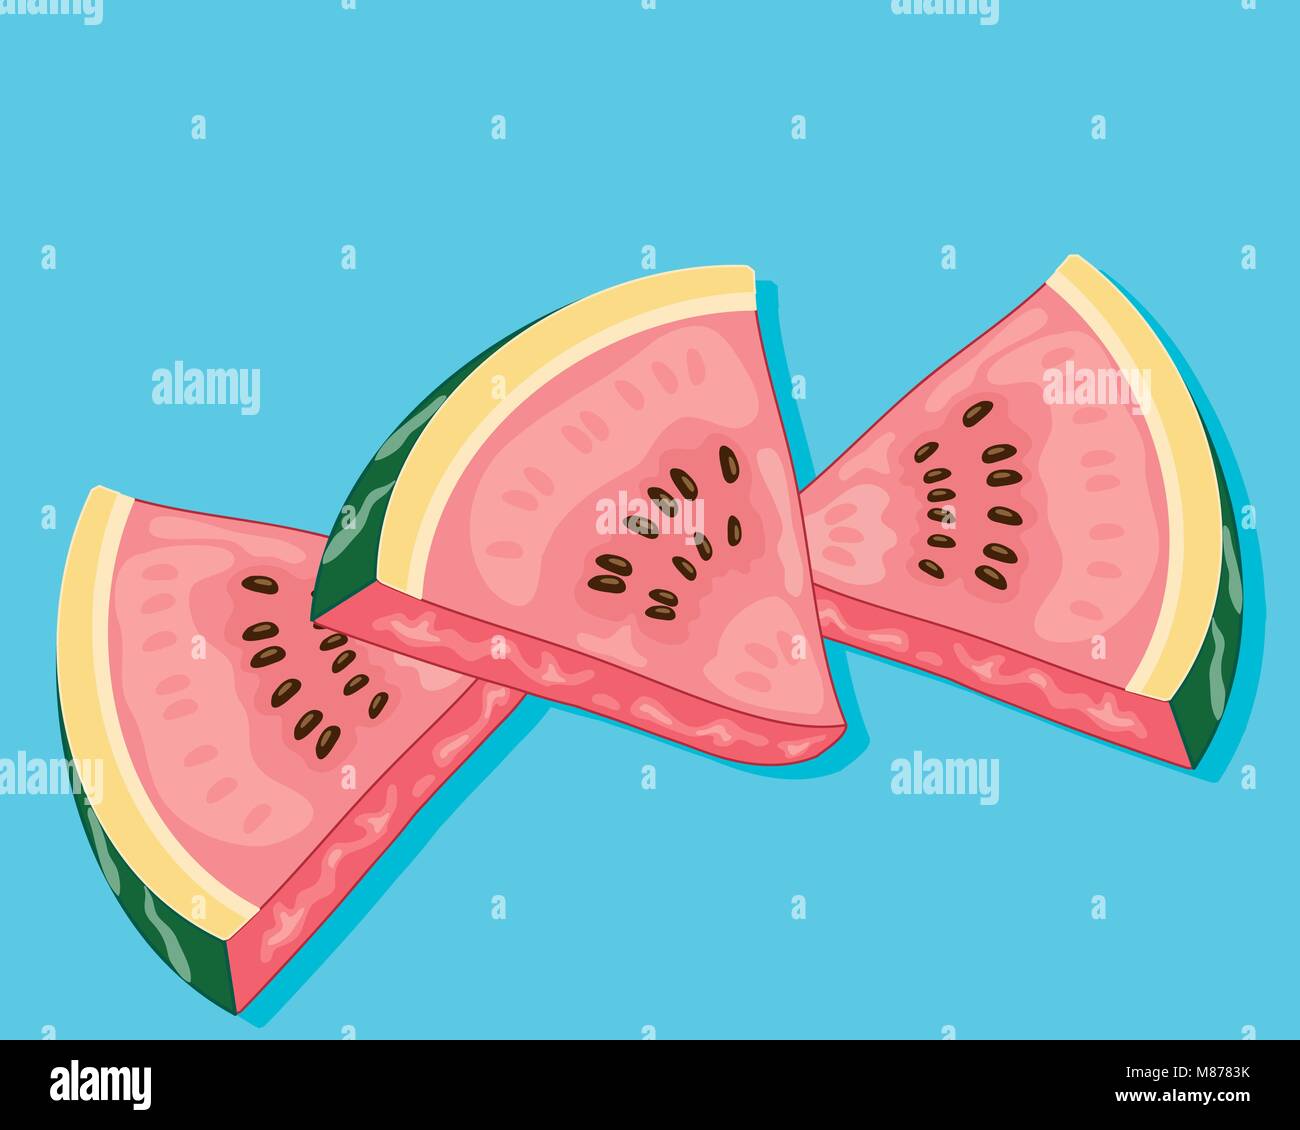 a vector illustration in eps format of three pieces of watermelon on an ocean blue background Stock Vector